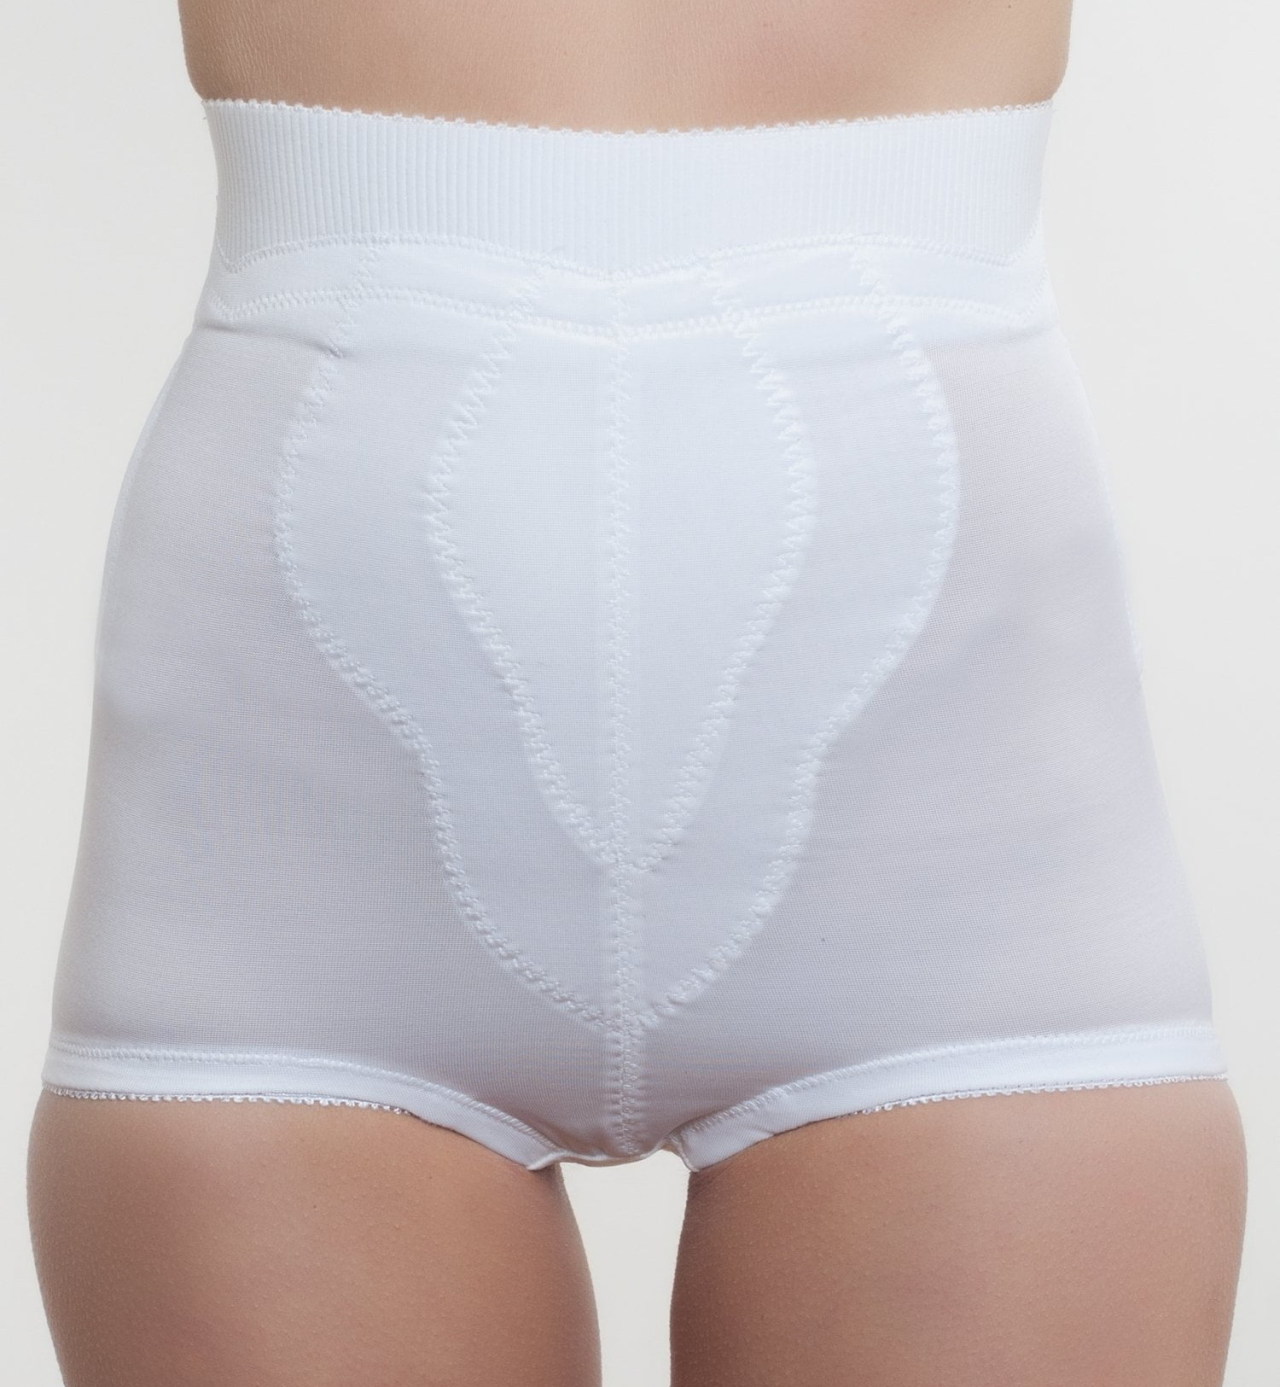 I adore girdles and the women who wear them — Never be without a proper  panty girdle!